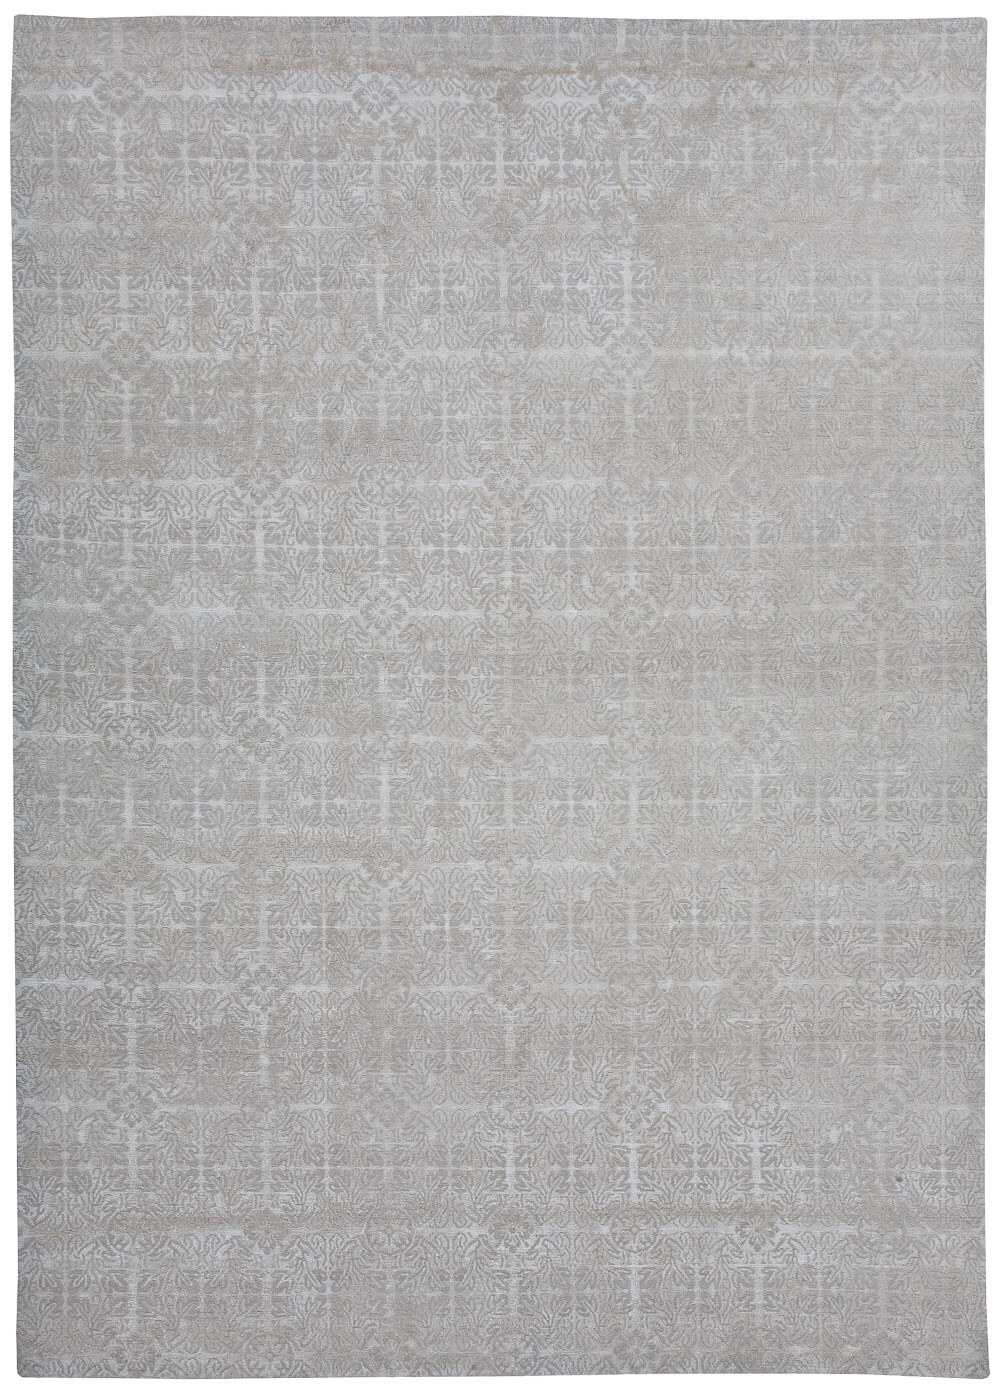 Bologna Grey Luxury Hand-Knotted Rug